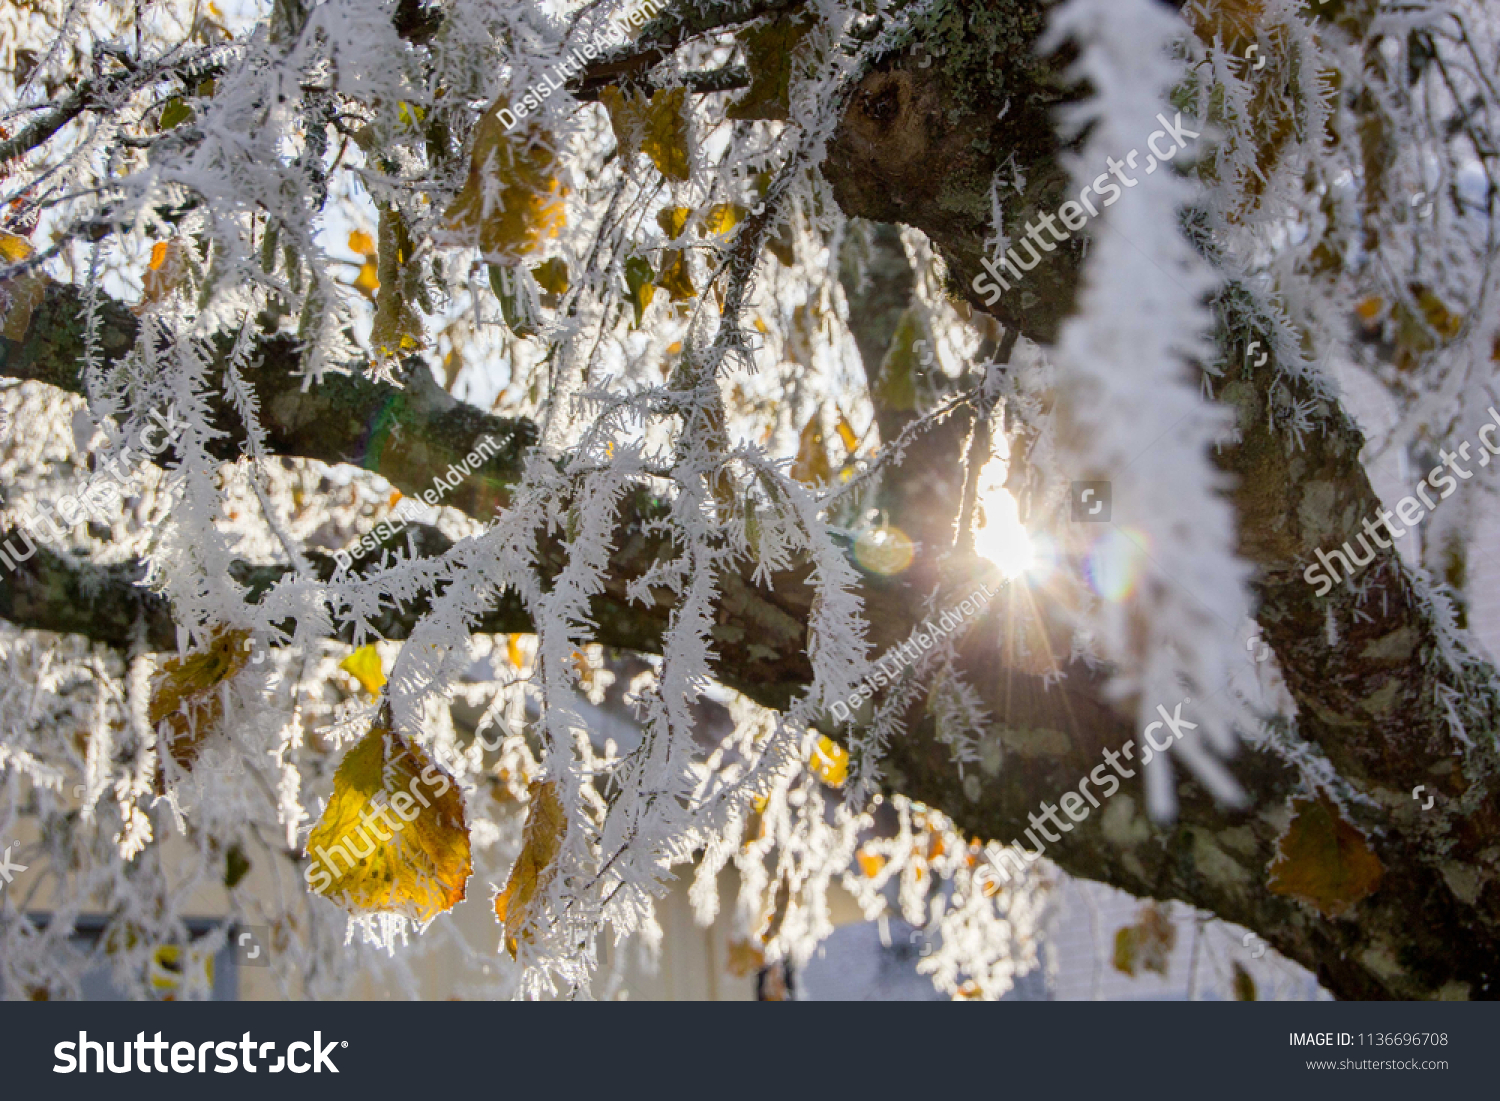 Detail of a frozen twig outdoors, signalizing winter will come soon with frosty twigs and branches covered with tiny and little spikes, creating a gray and cold atmosphere #1136696708